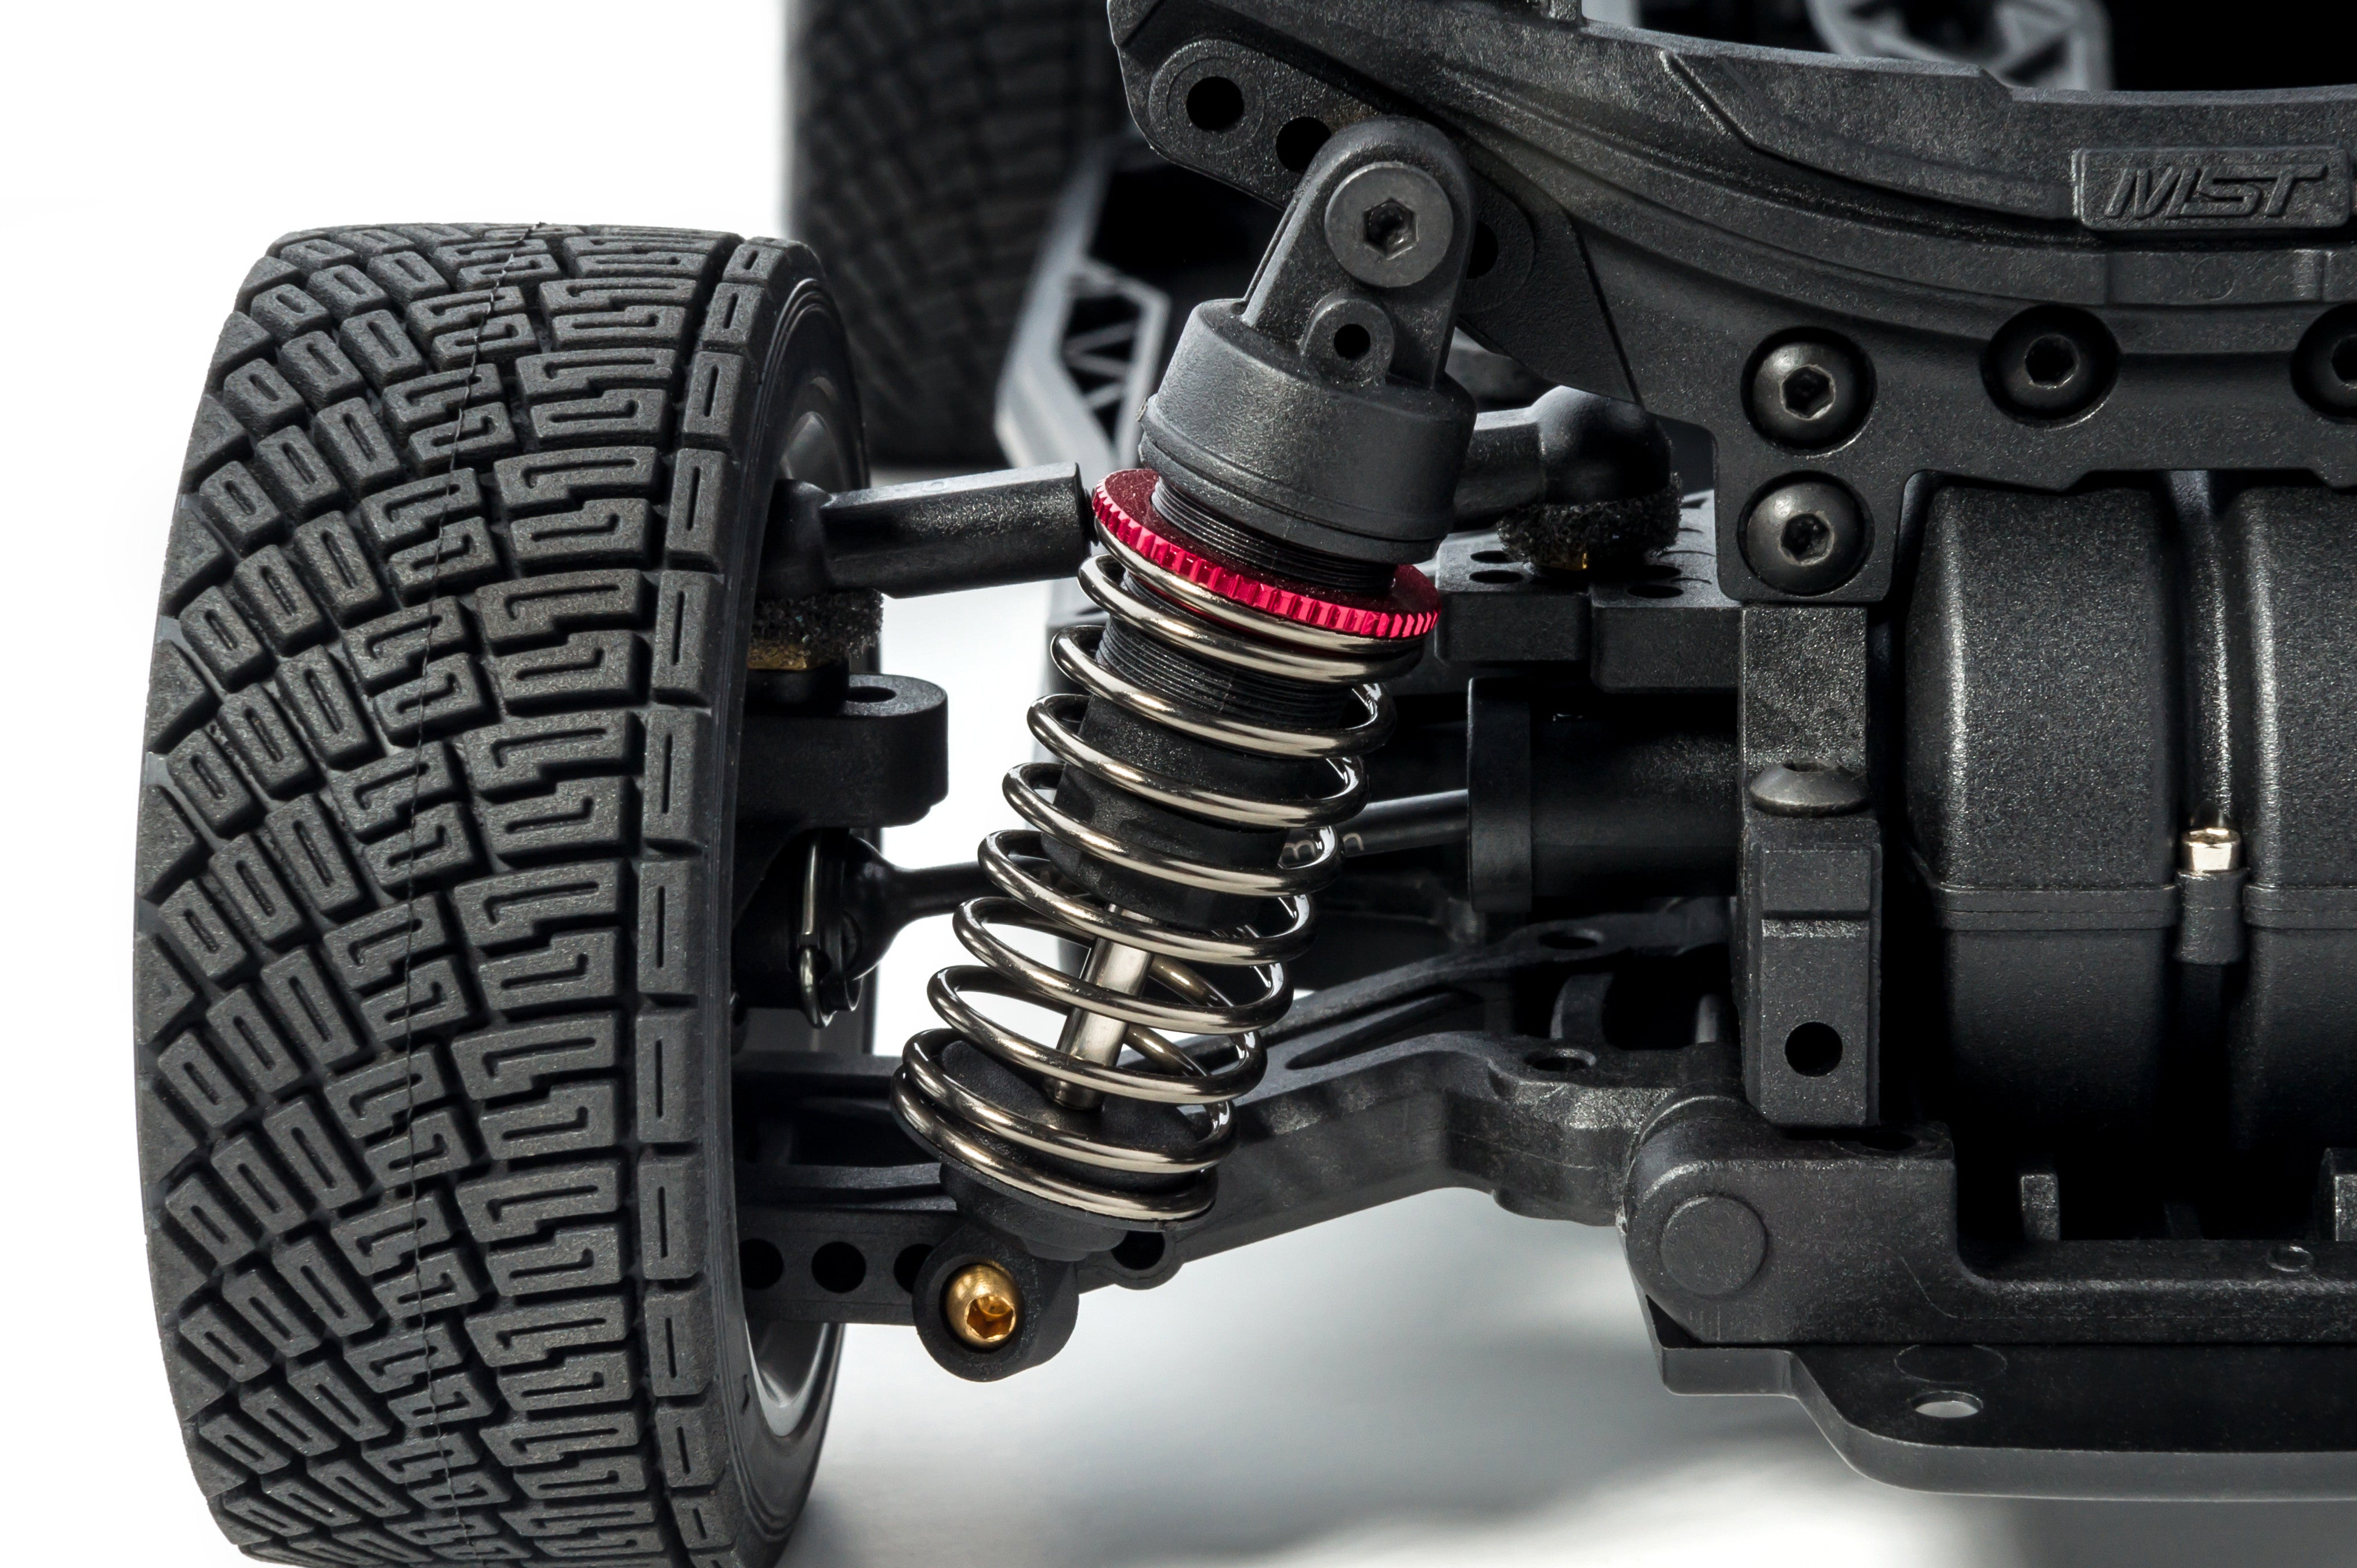 MST XXX-Rally 4wd Roller chassis ARR 532162